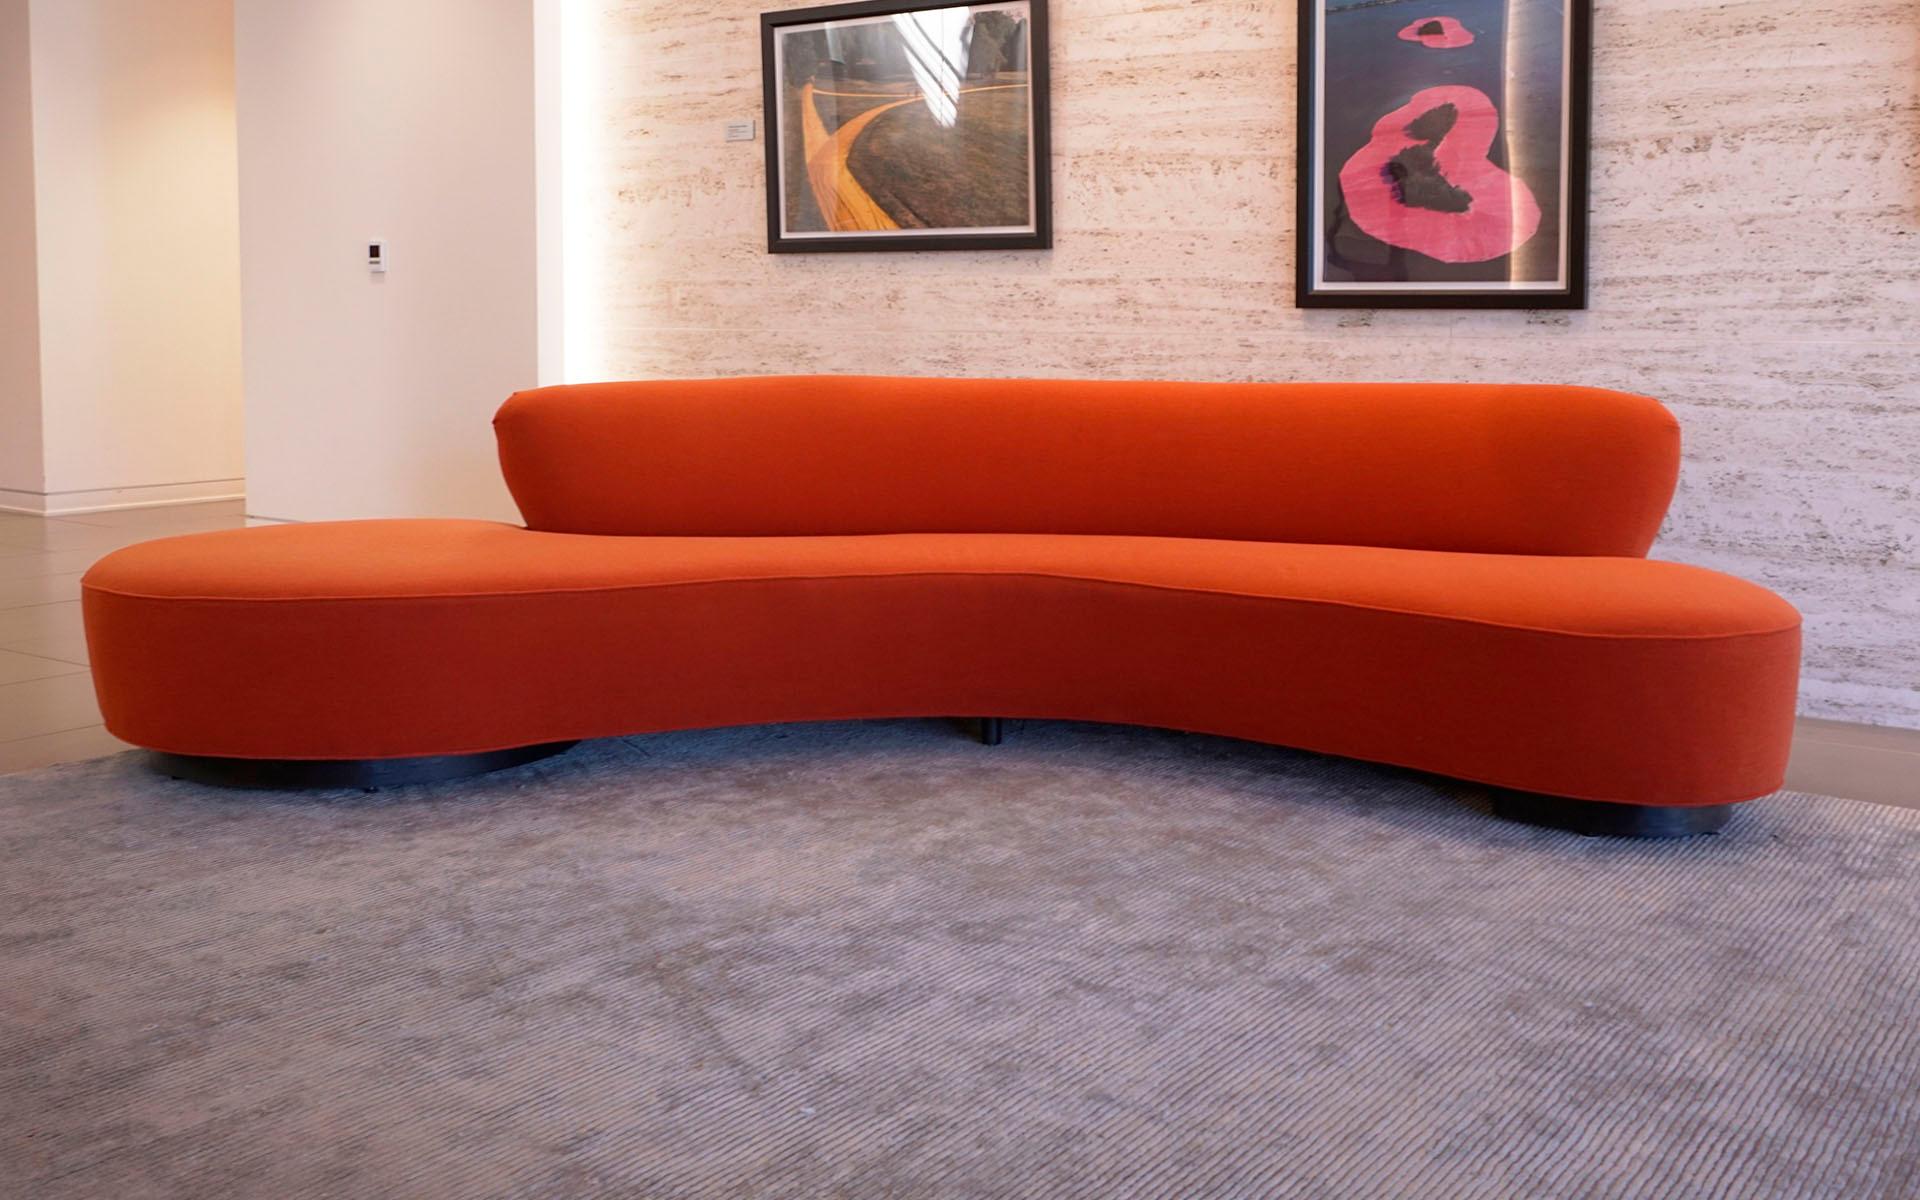 Two original Vladimir Kagan curved sofas in the original orange fabric in very good to excellent condition. Very few if any signs of use. These sofas are about 20 years old and were rarely used. Beautiful. Price is for each.